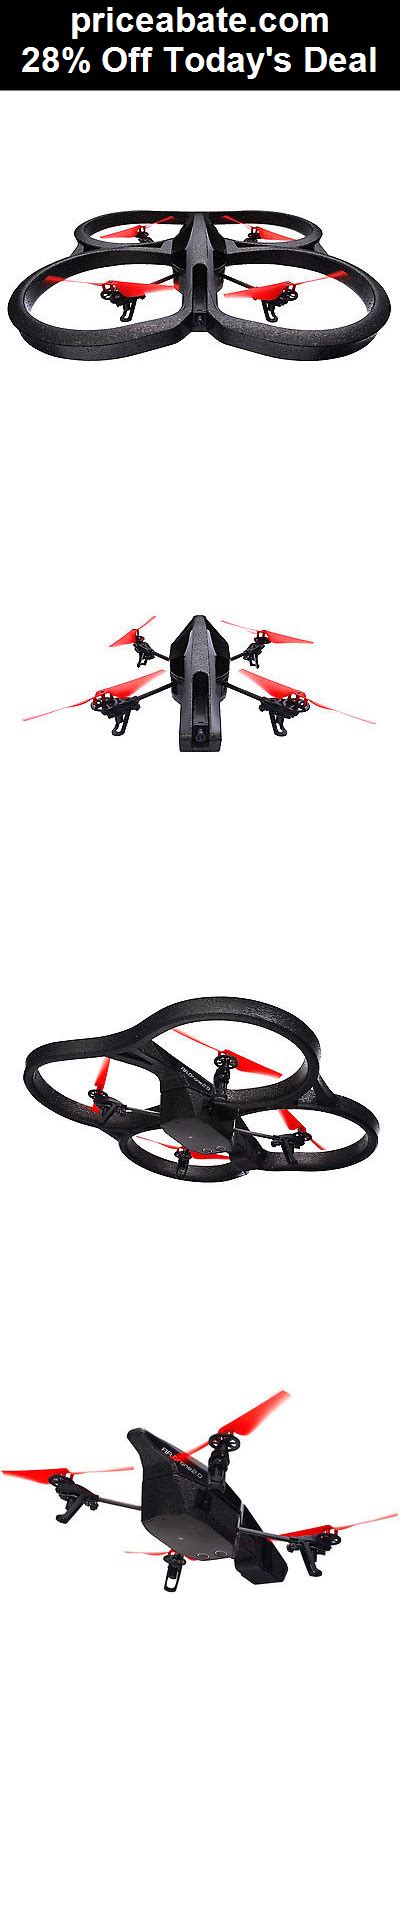 parrot ar drone  power edition remote flying quad propeller drone whd camera ar drone